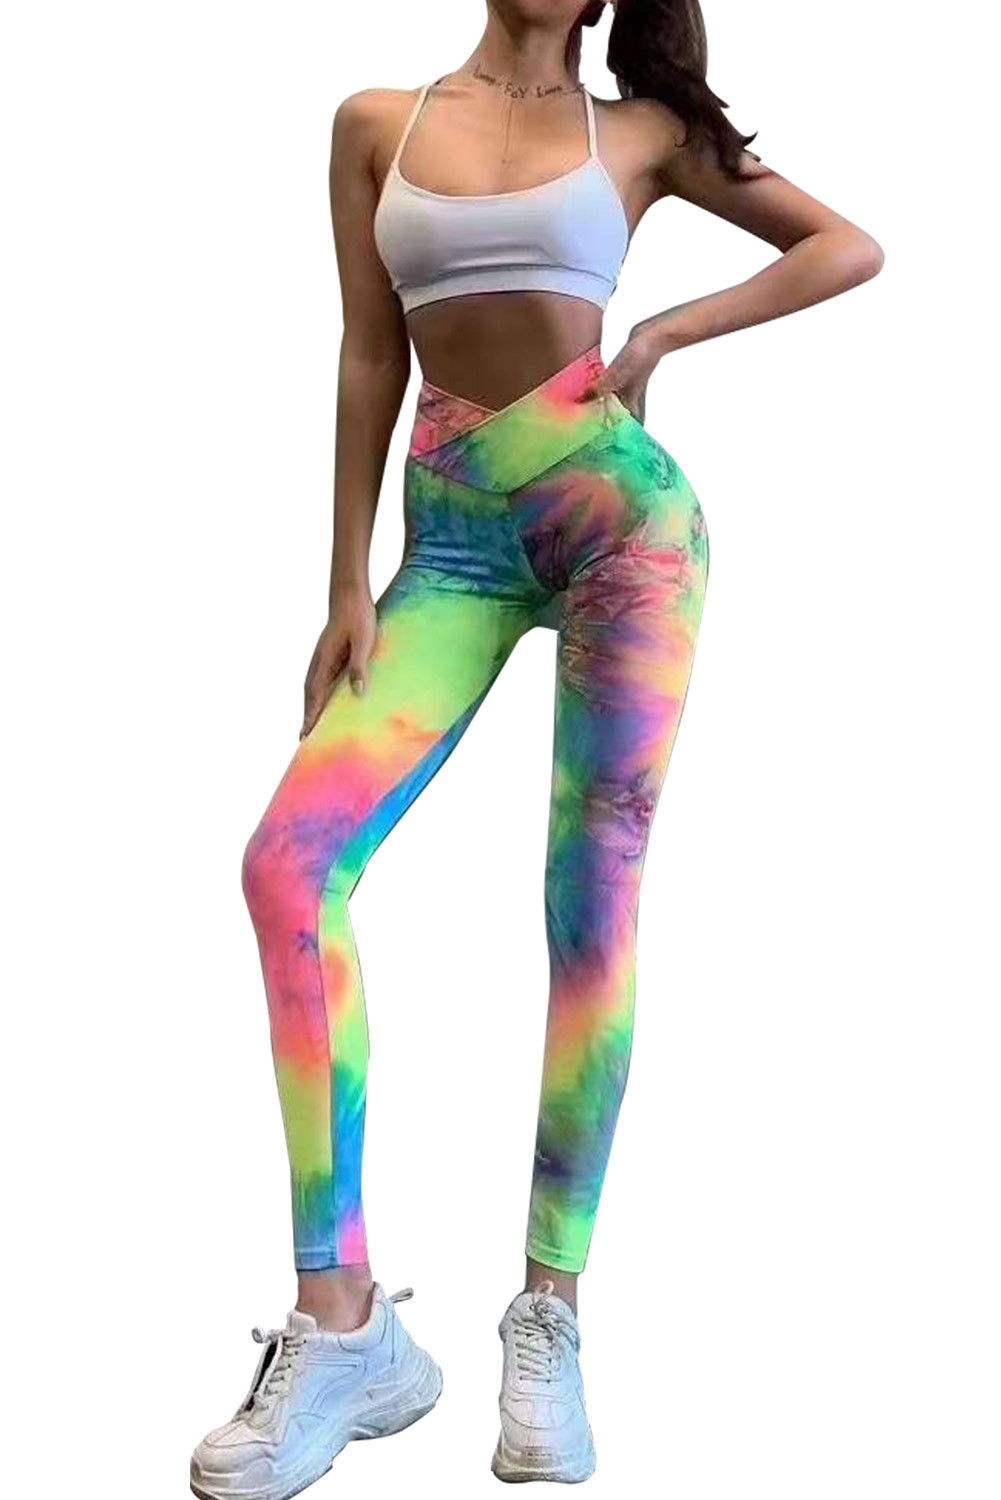  Workout Leggings For Women,Seamless Tie Dye Leggings, High  Waisted, Scrunch Butt Lifting,Squat Proof,Gusseted Crotch,Tummy Control  Yoga Pants